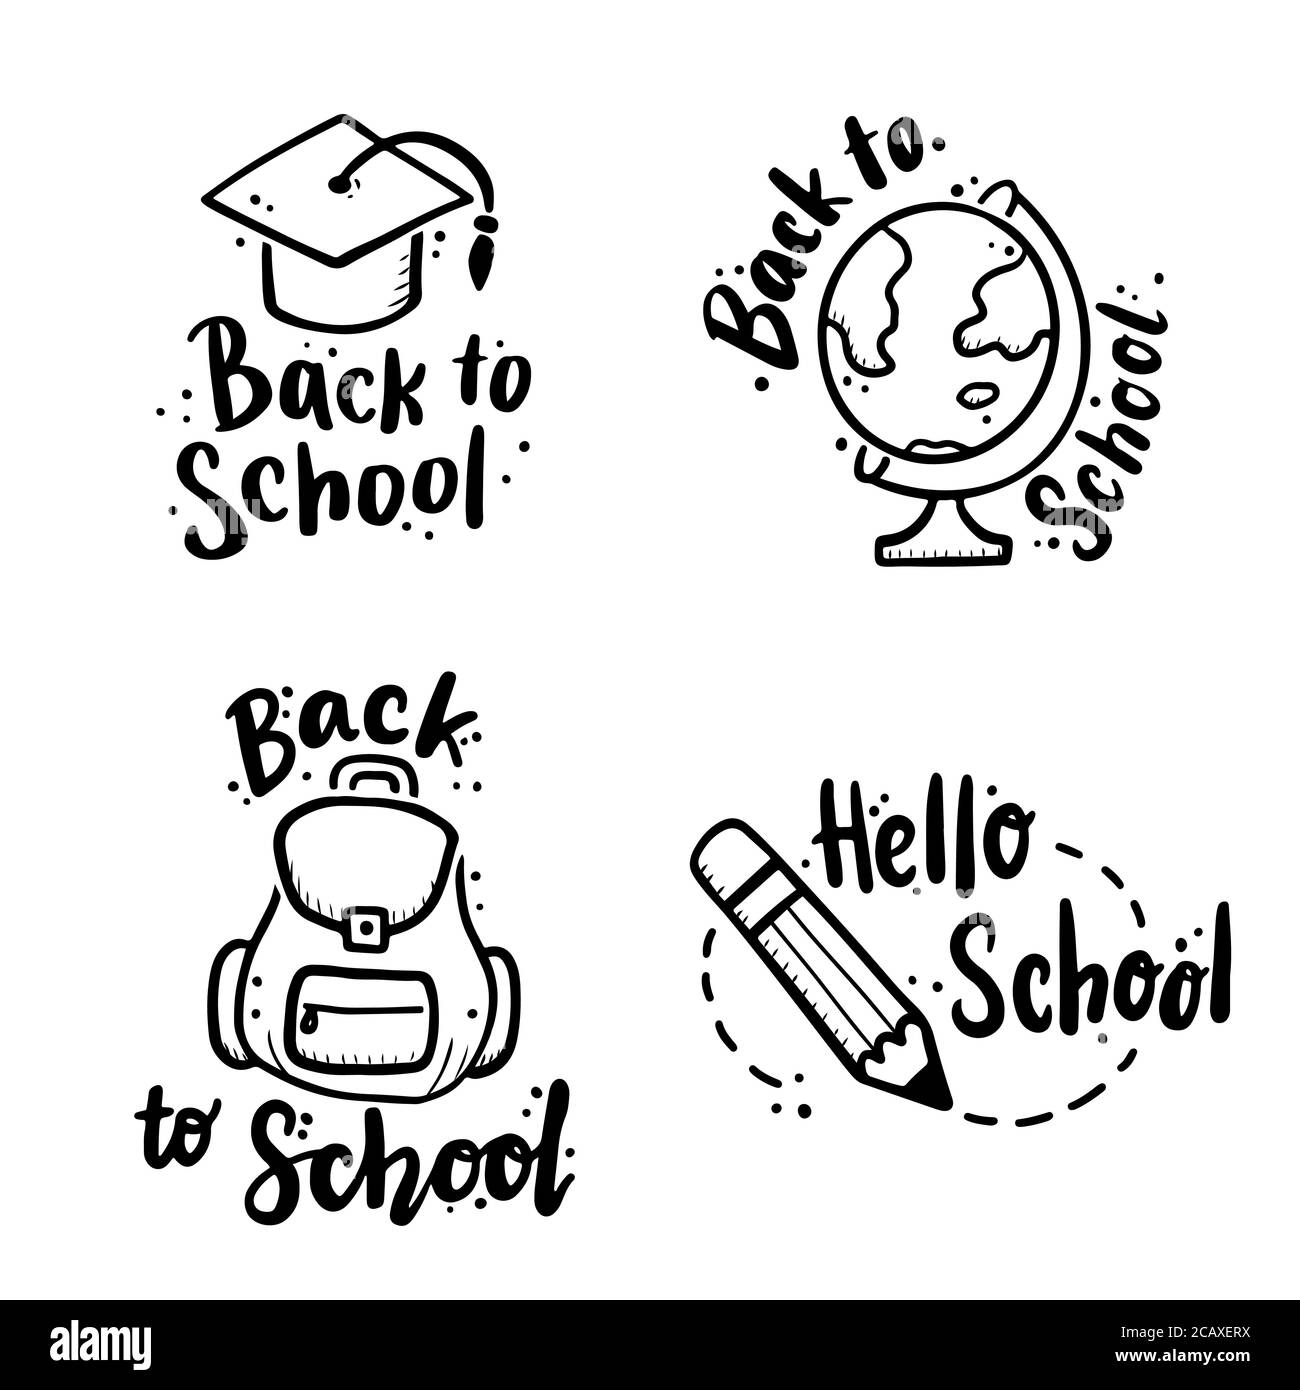 Kids School Background Vectors from GraphicRiver